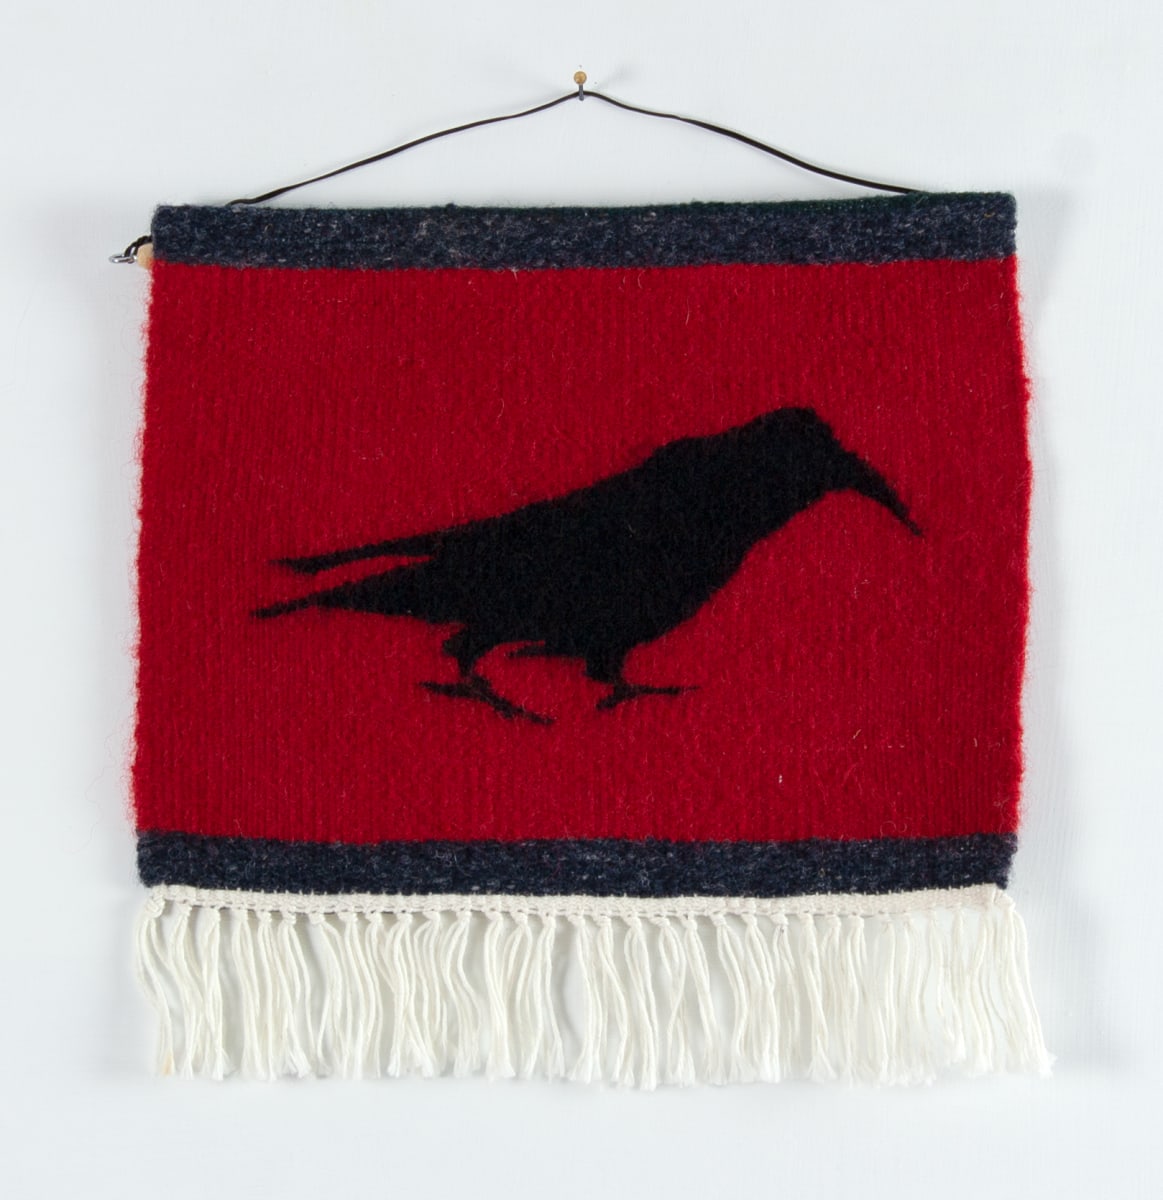 Lone Crow on Red by Phyllis Anna Stevens Estate 